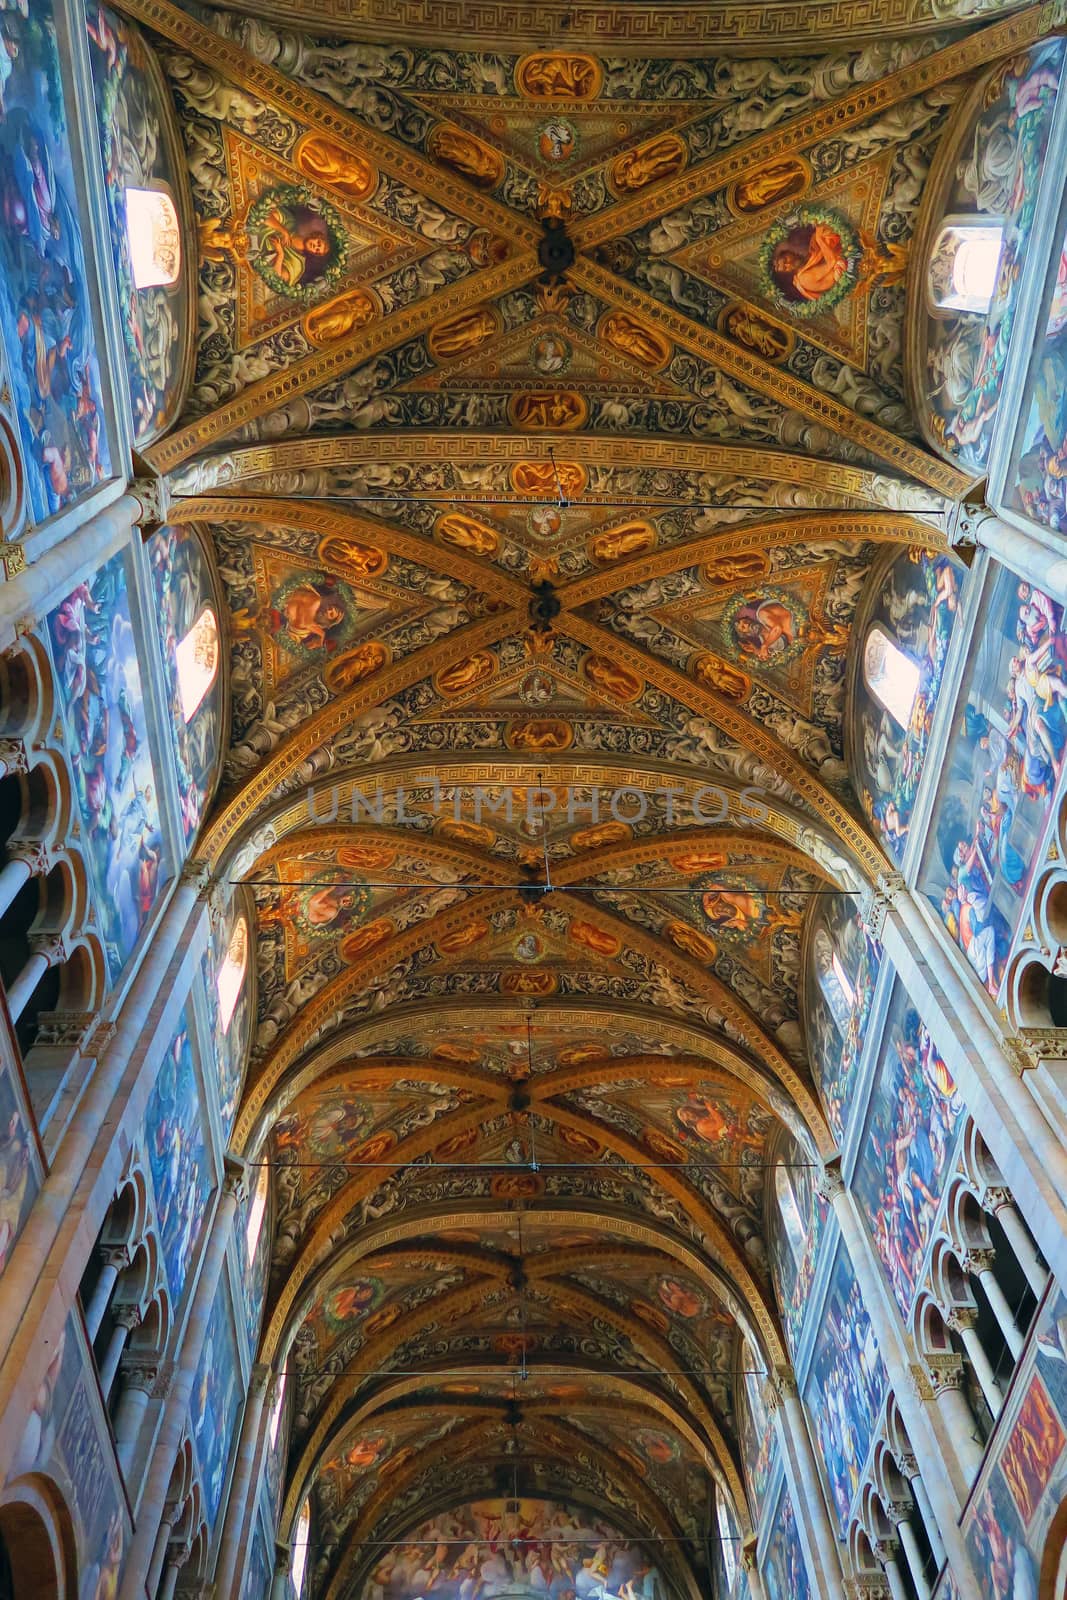 Parma,Italy, 25 september 2015.Ceiling of the cathedral in Parma, Italy. The rich decoration is a work by Girolamo Mazzola Bedoli that he painted between 1555 and 1557